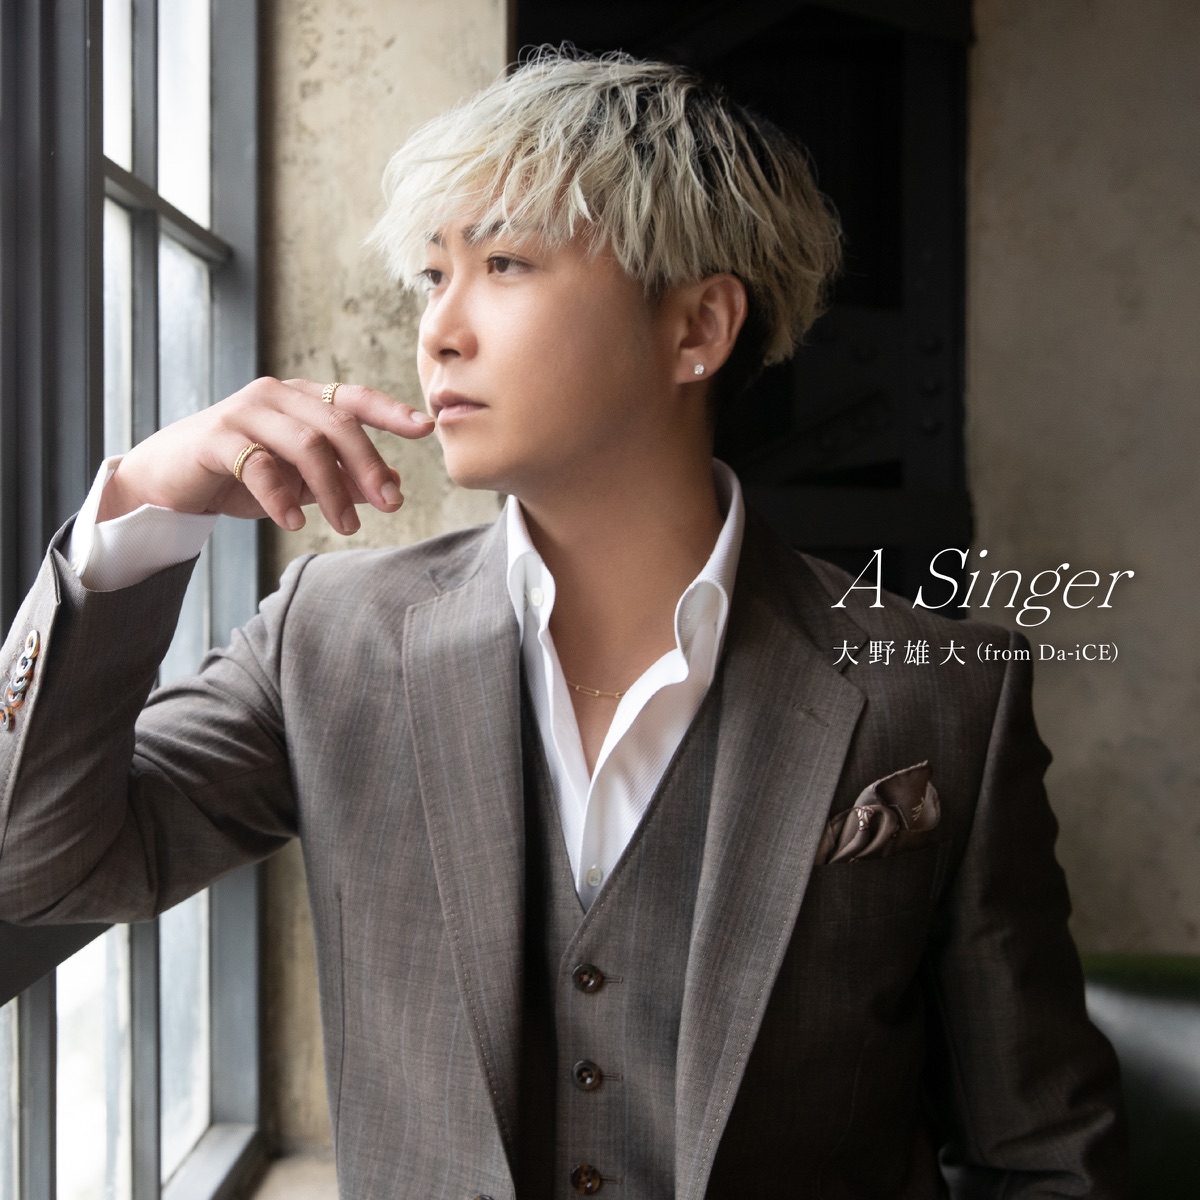 Cover art for『Yudai Ohno (from Da-iCE) - Hitotsu』from the release『A Singer』